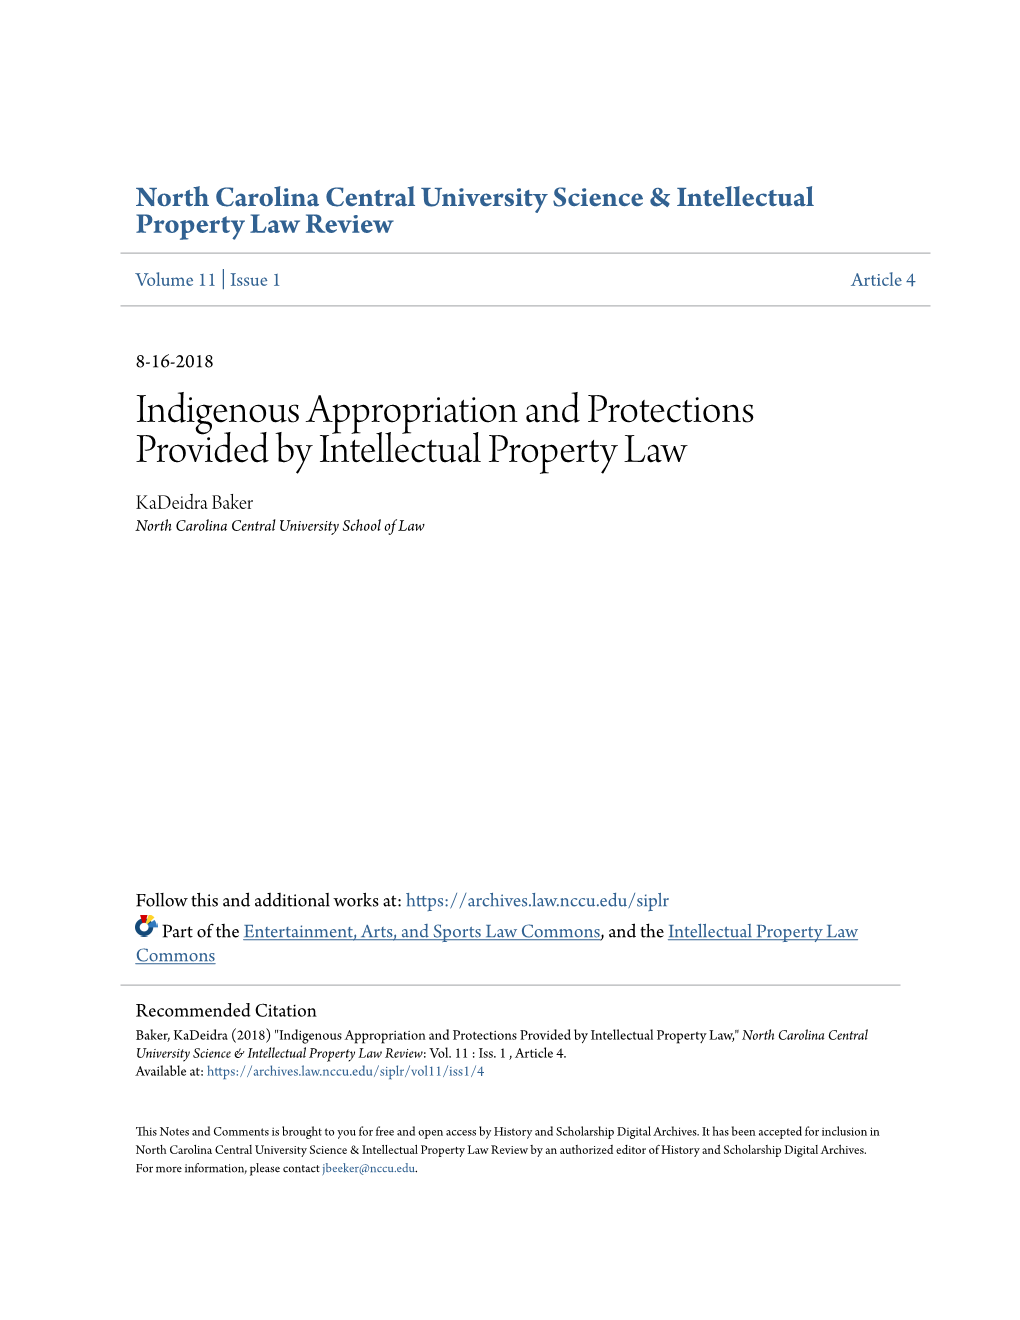 Indigenous Appropriation and Protections Provided by Intellectual Property Law Kadeidra Baker North Carolina Central University School of Law